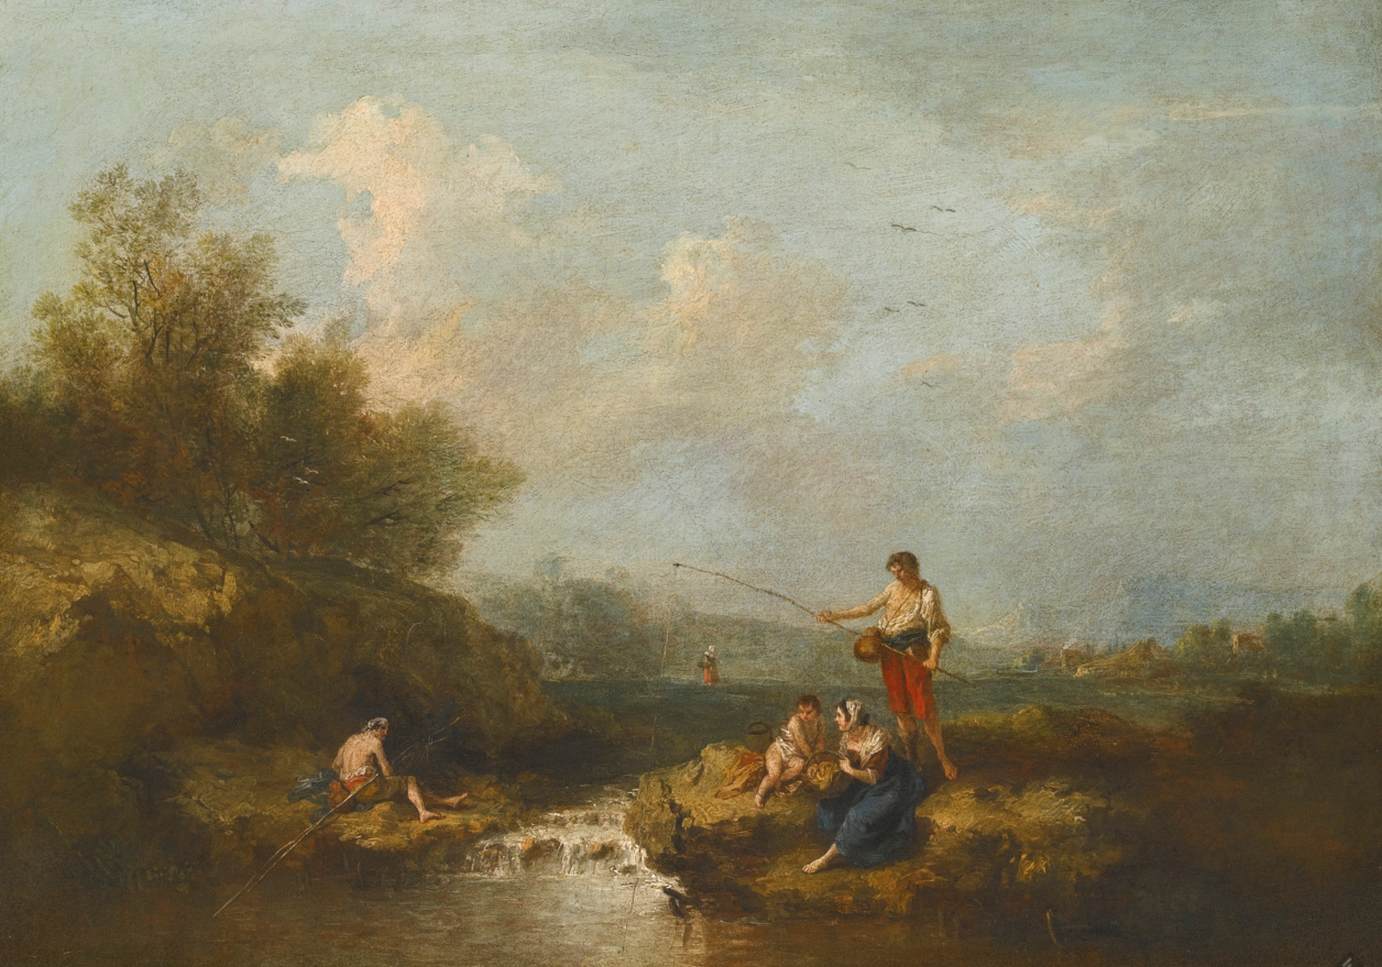 Fishermen and Other Figures Beside a Flowing Stream